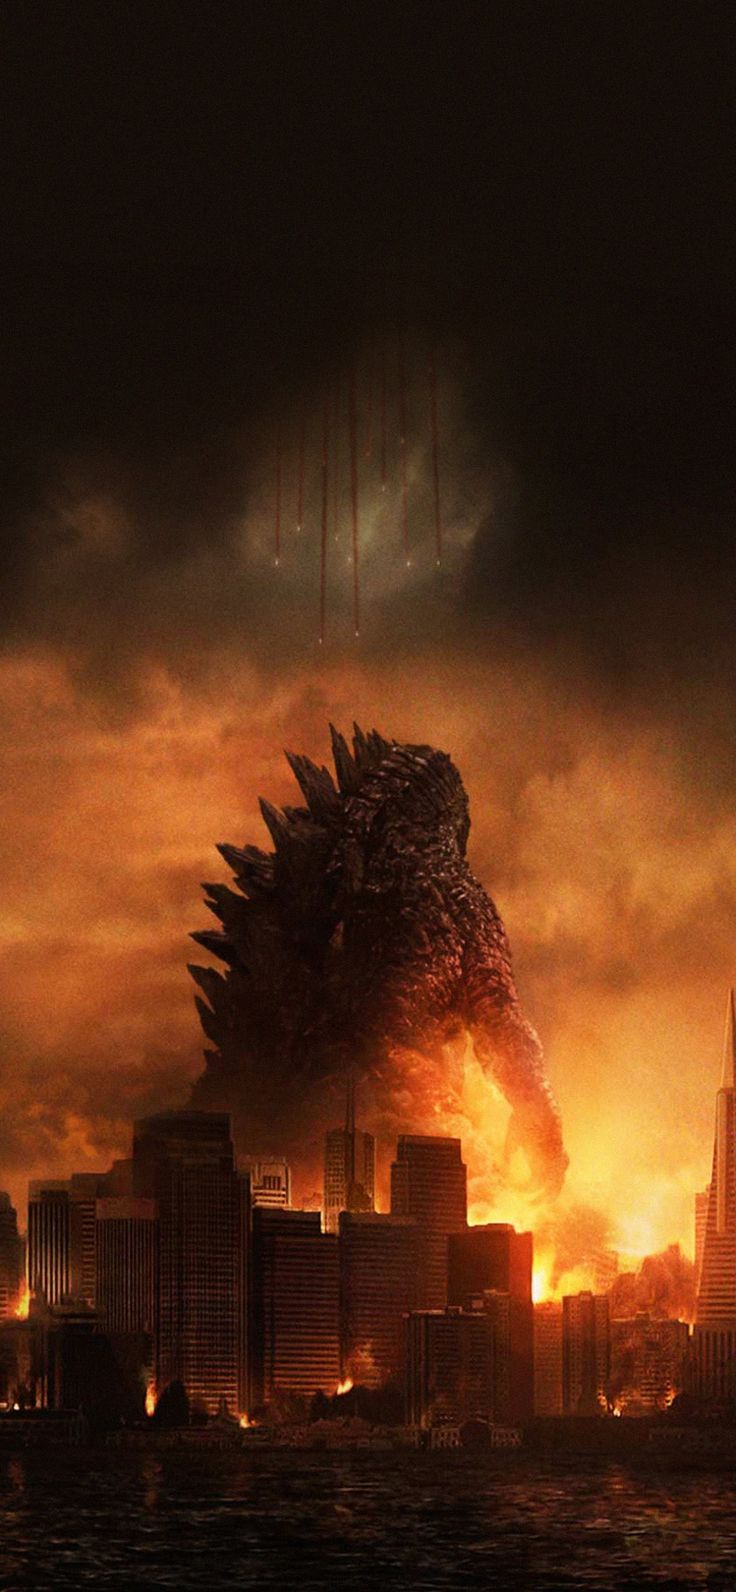 godzilla in the middle of a city with fire coming out of it's mouth